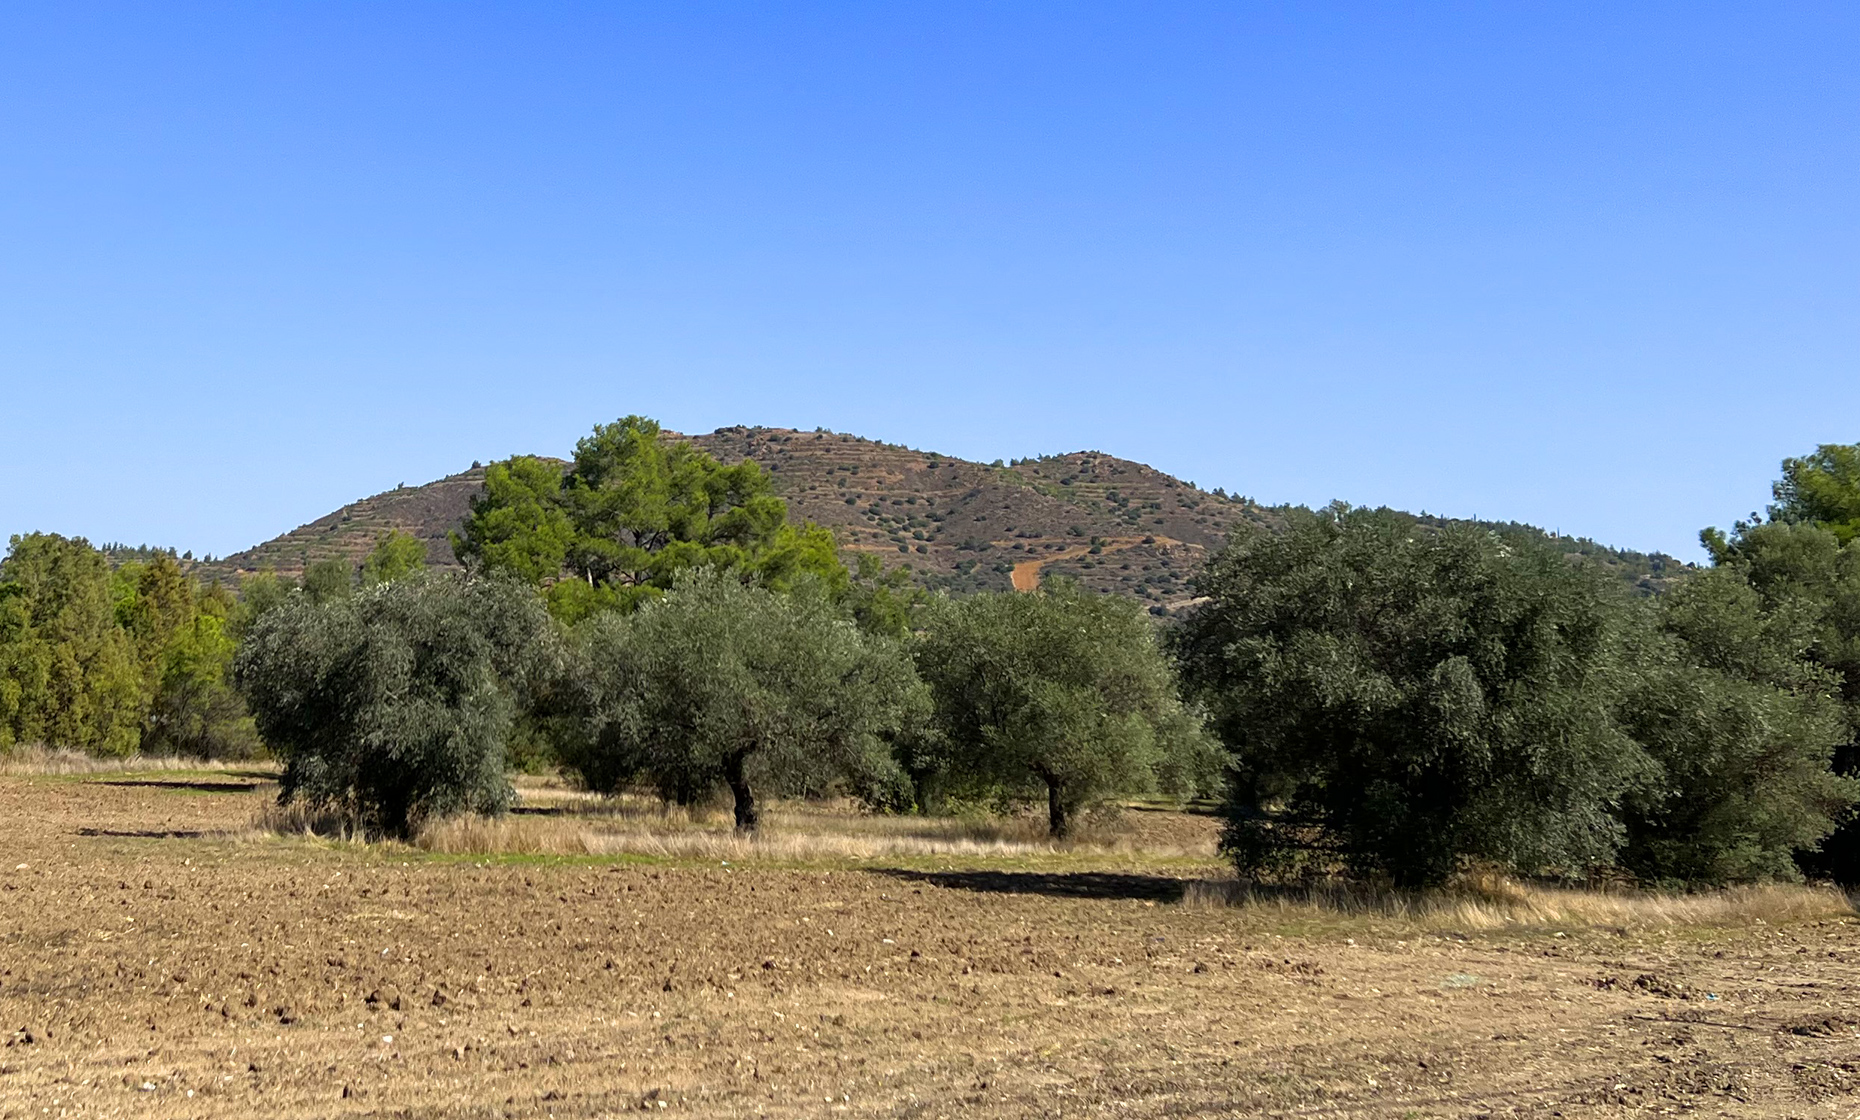 Old Olive trees in Pyrga